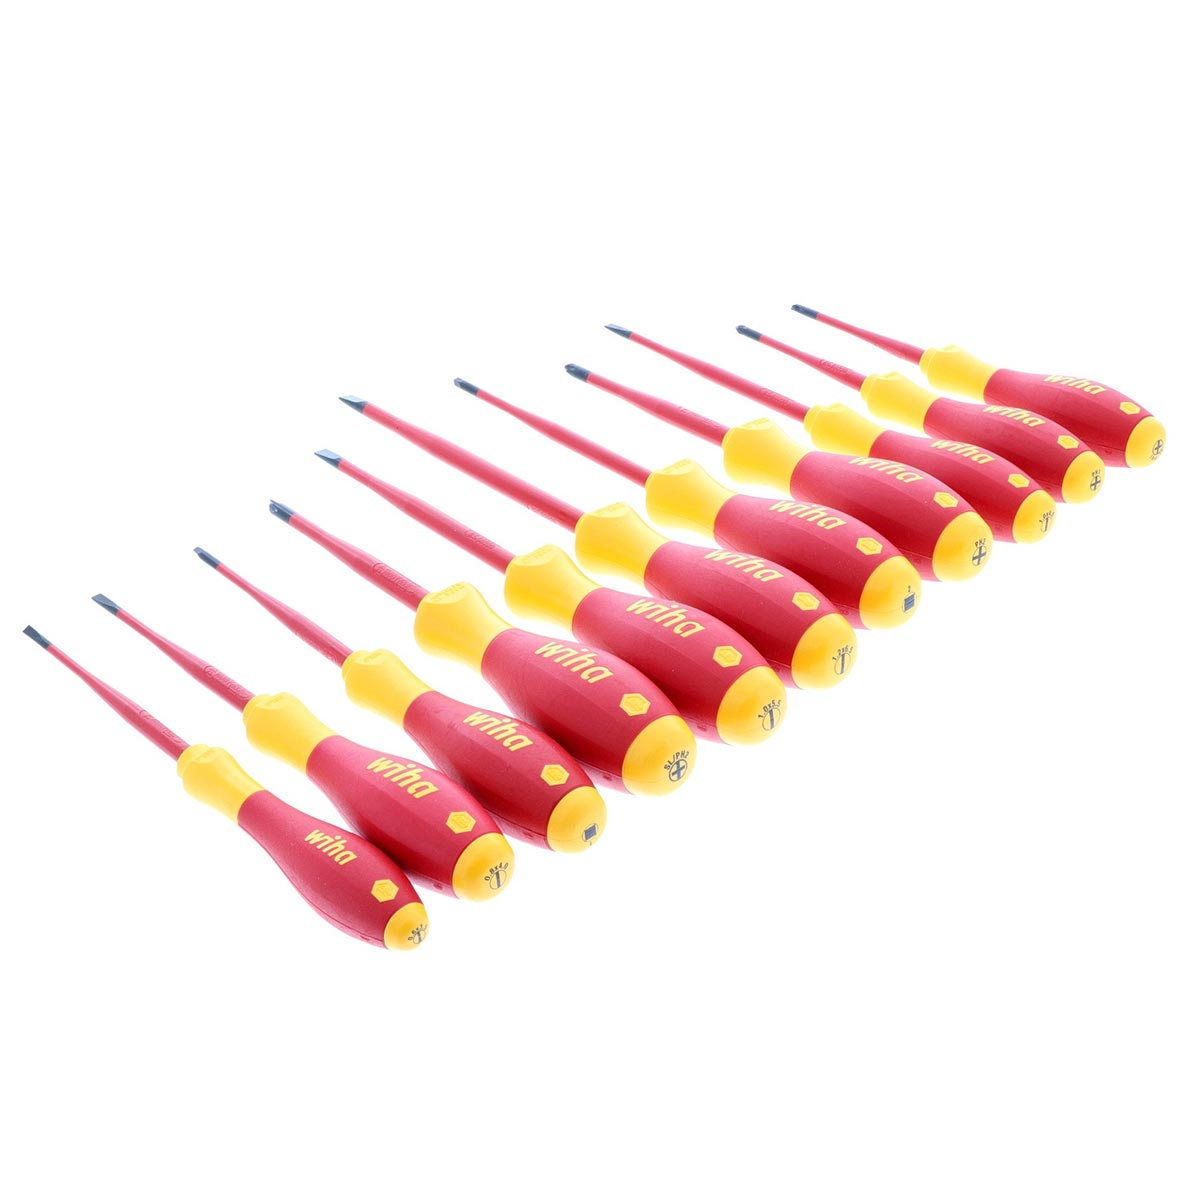 Wiha Insulated Slimline Slotted Phillips Square And Xeno Screwdrivers - 11 Piece Set